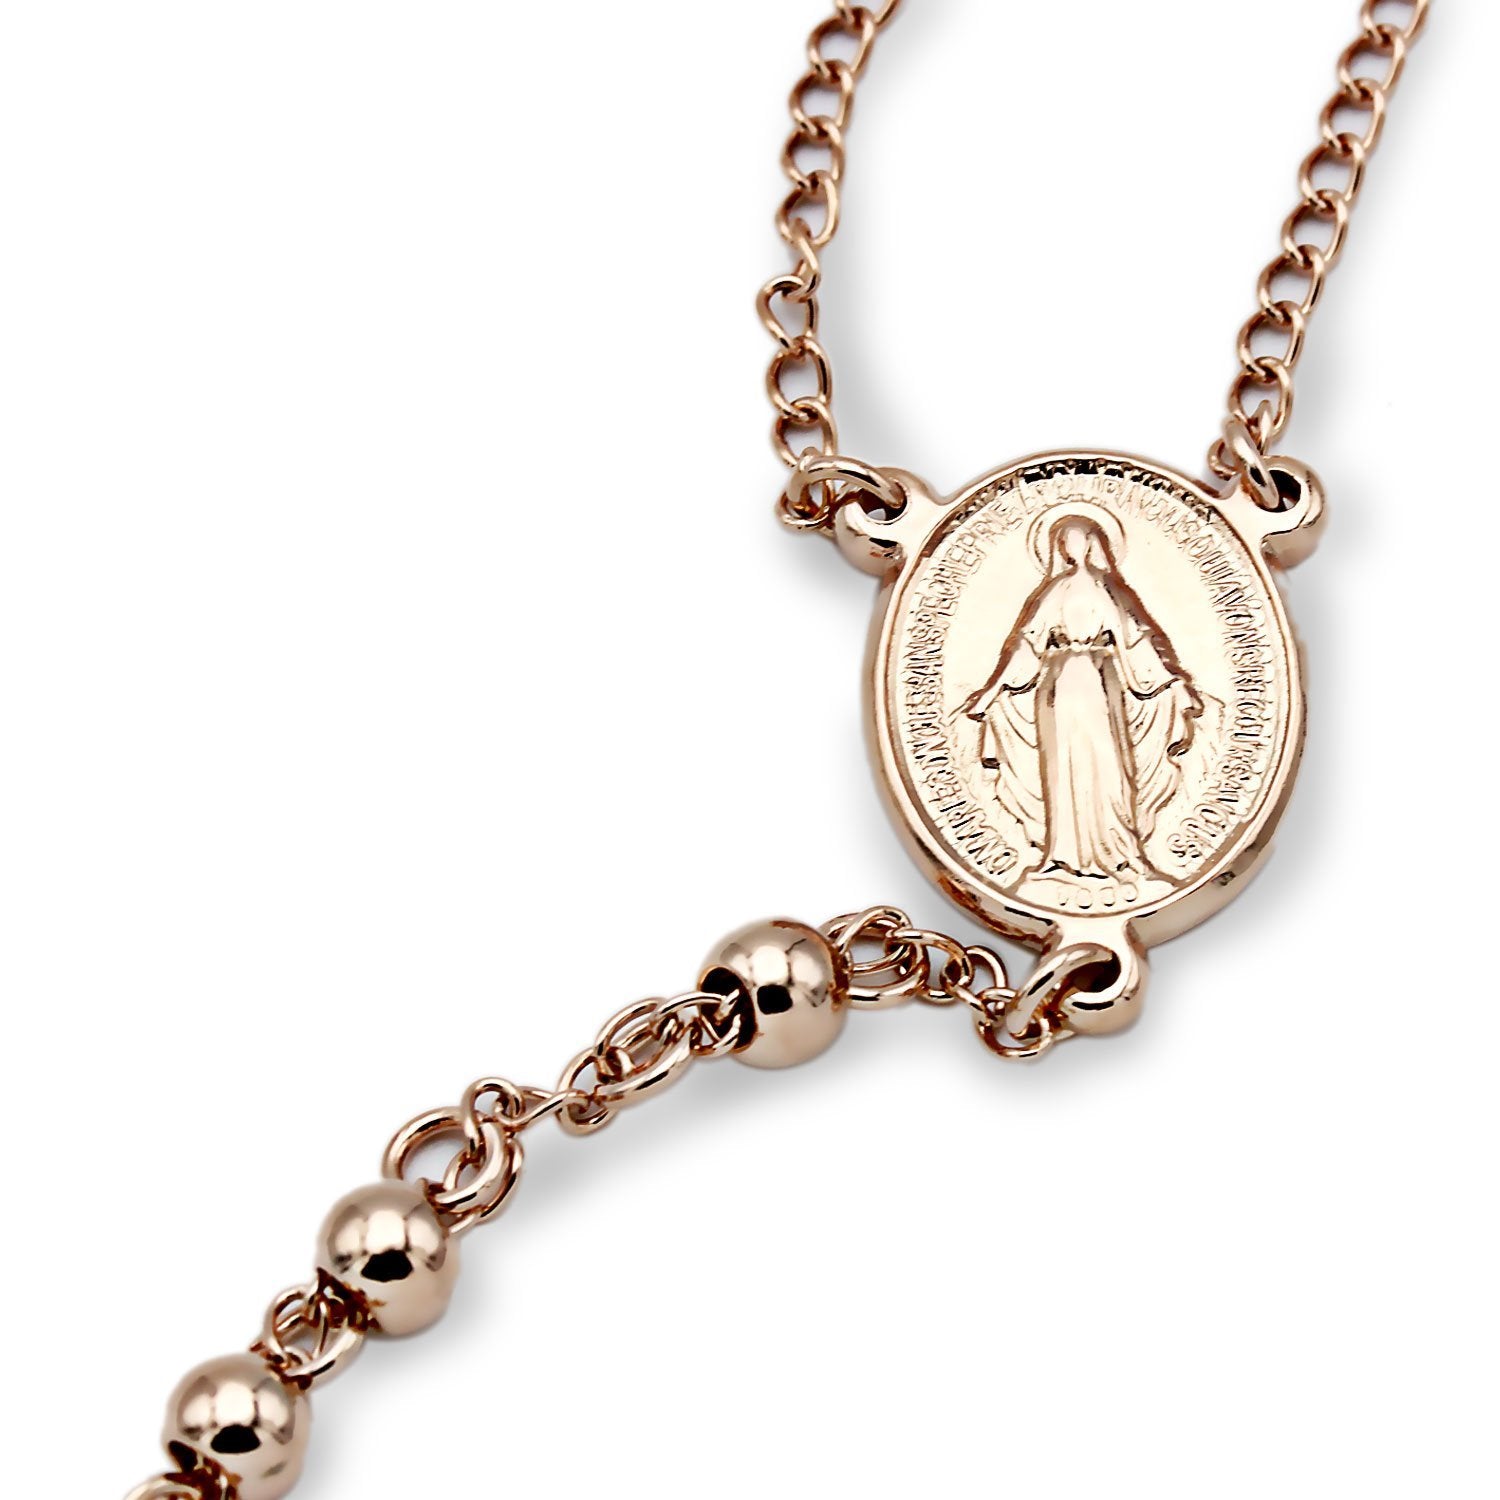 Traditional Rose Gold Rosary Necklace Five Decade Catholic Prayer Beads 5mm